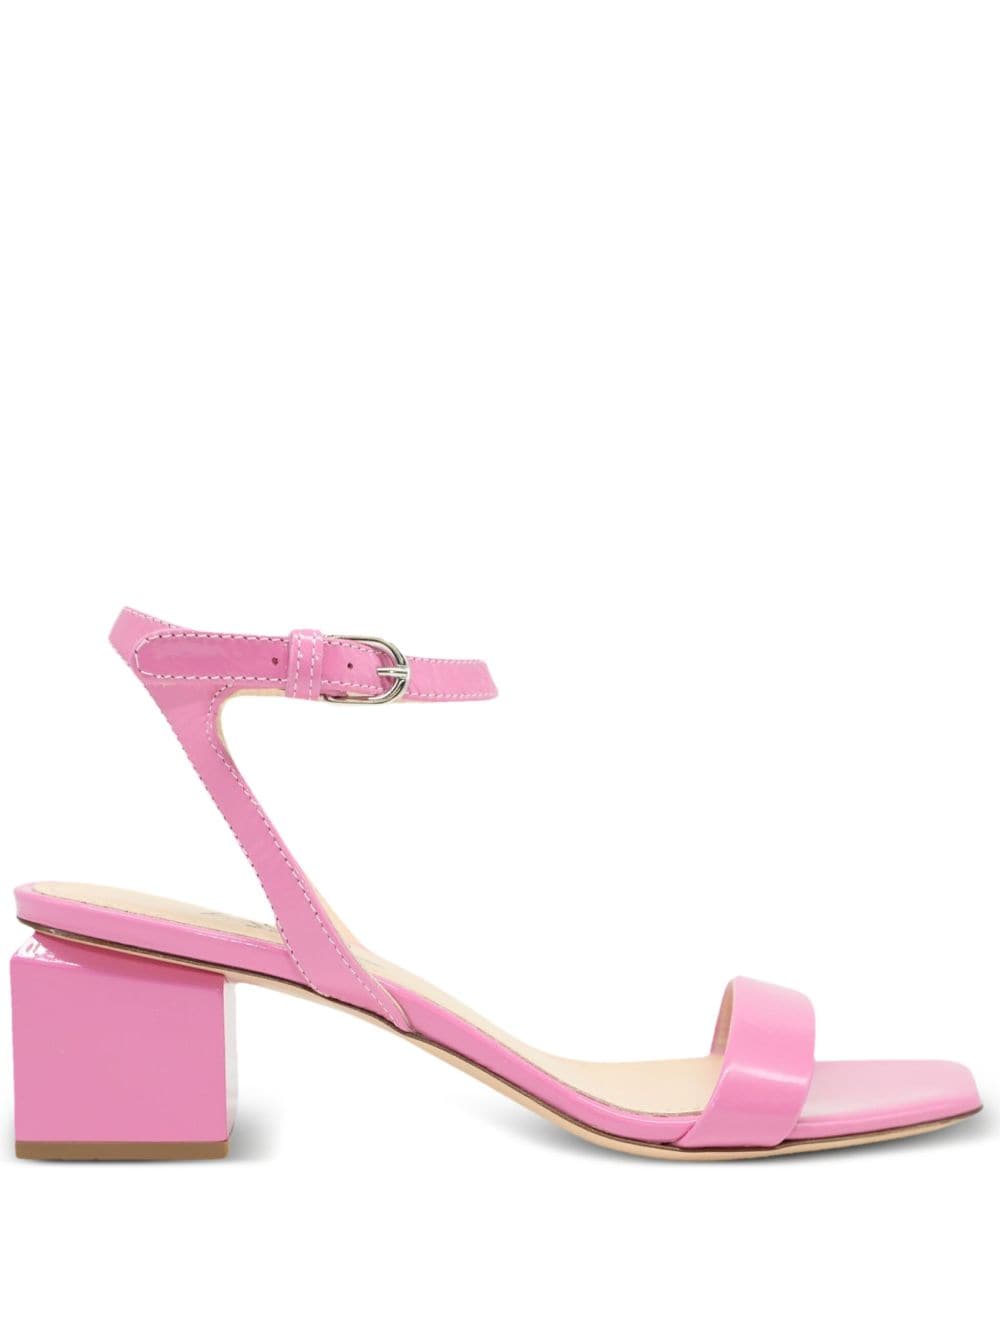 AGL Angie 60mm patent-leather sandals - Pink von AGL